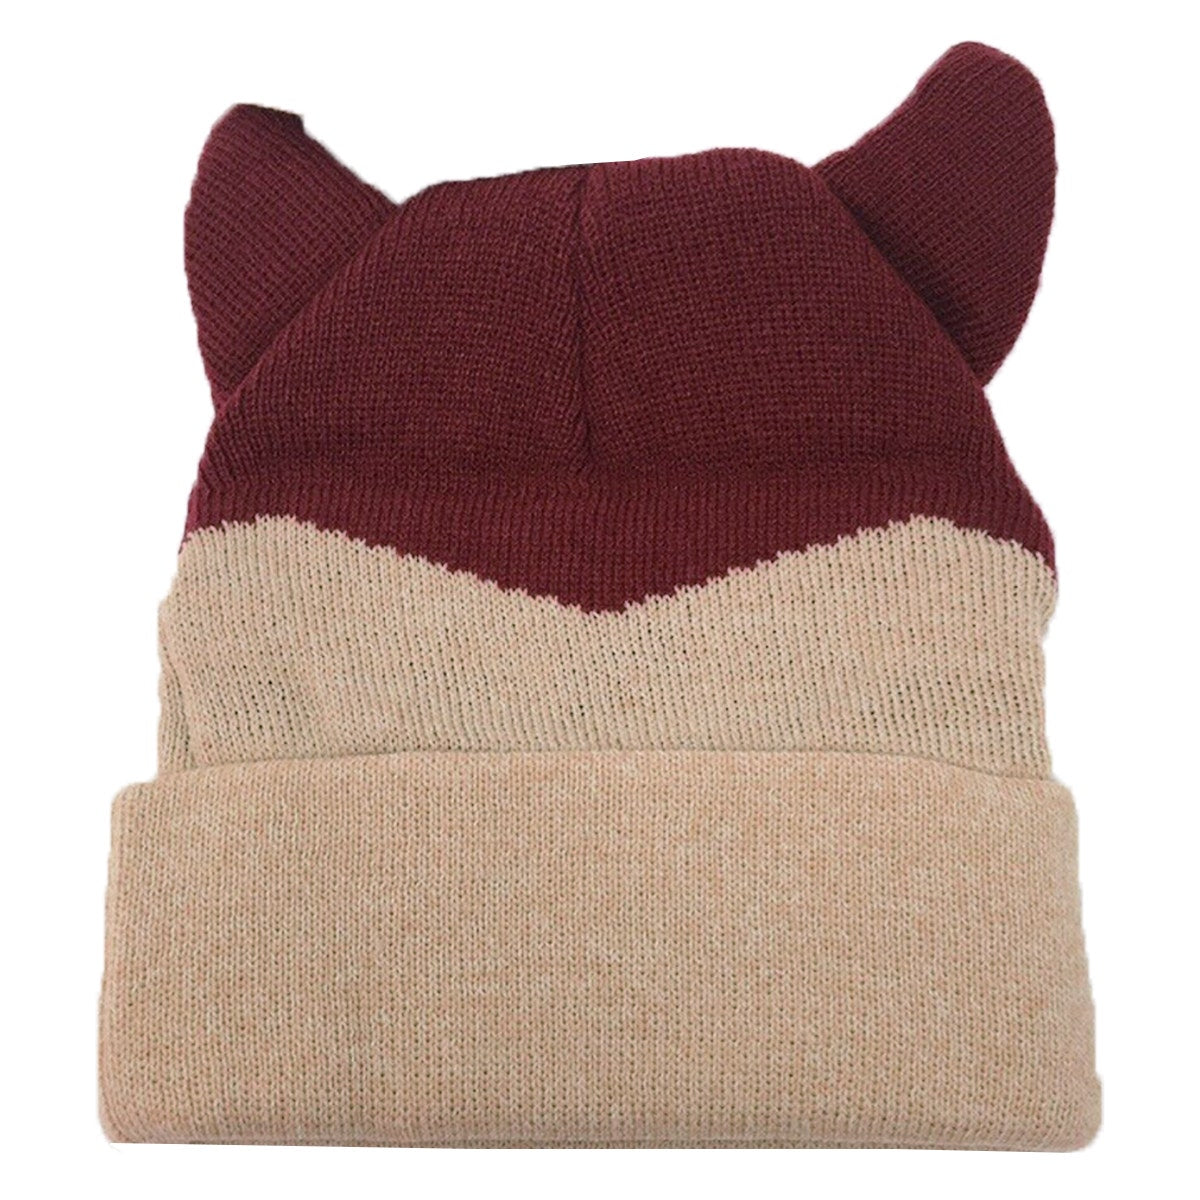 Fuggler Cuffed Knit Winter Beanie Hat for Kids, Teens & Adults